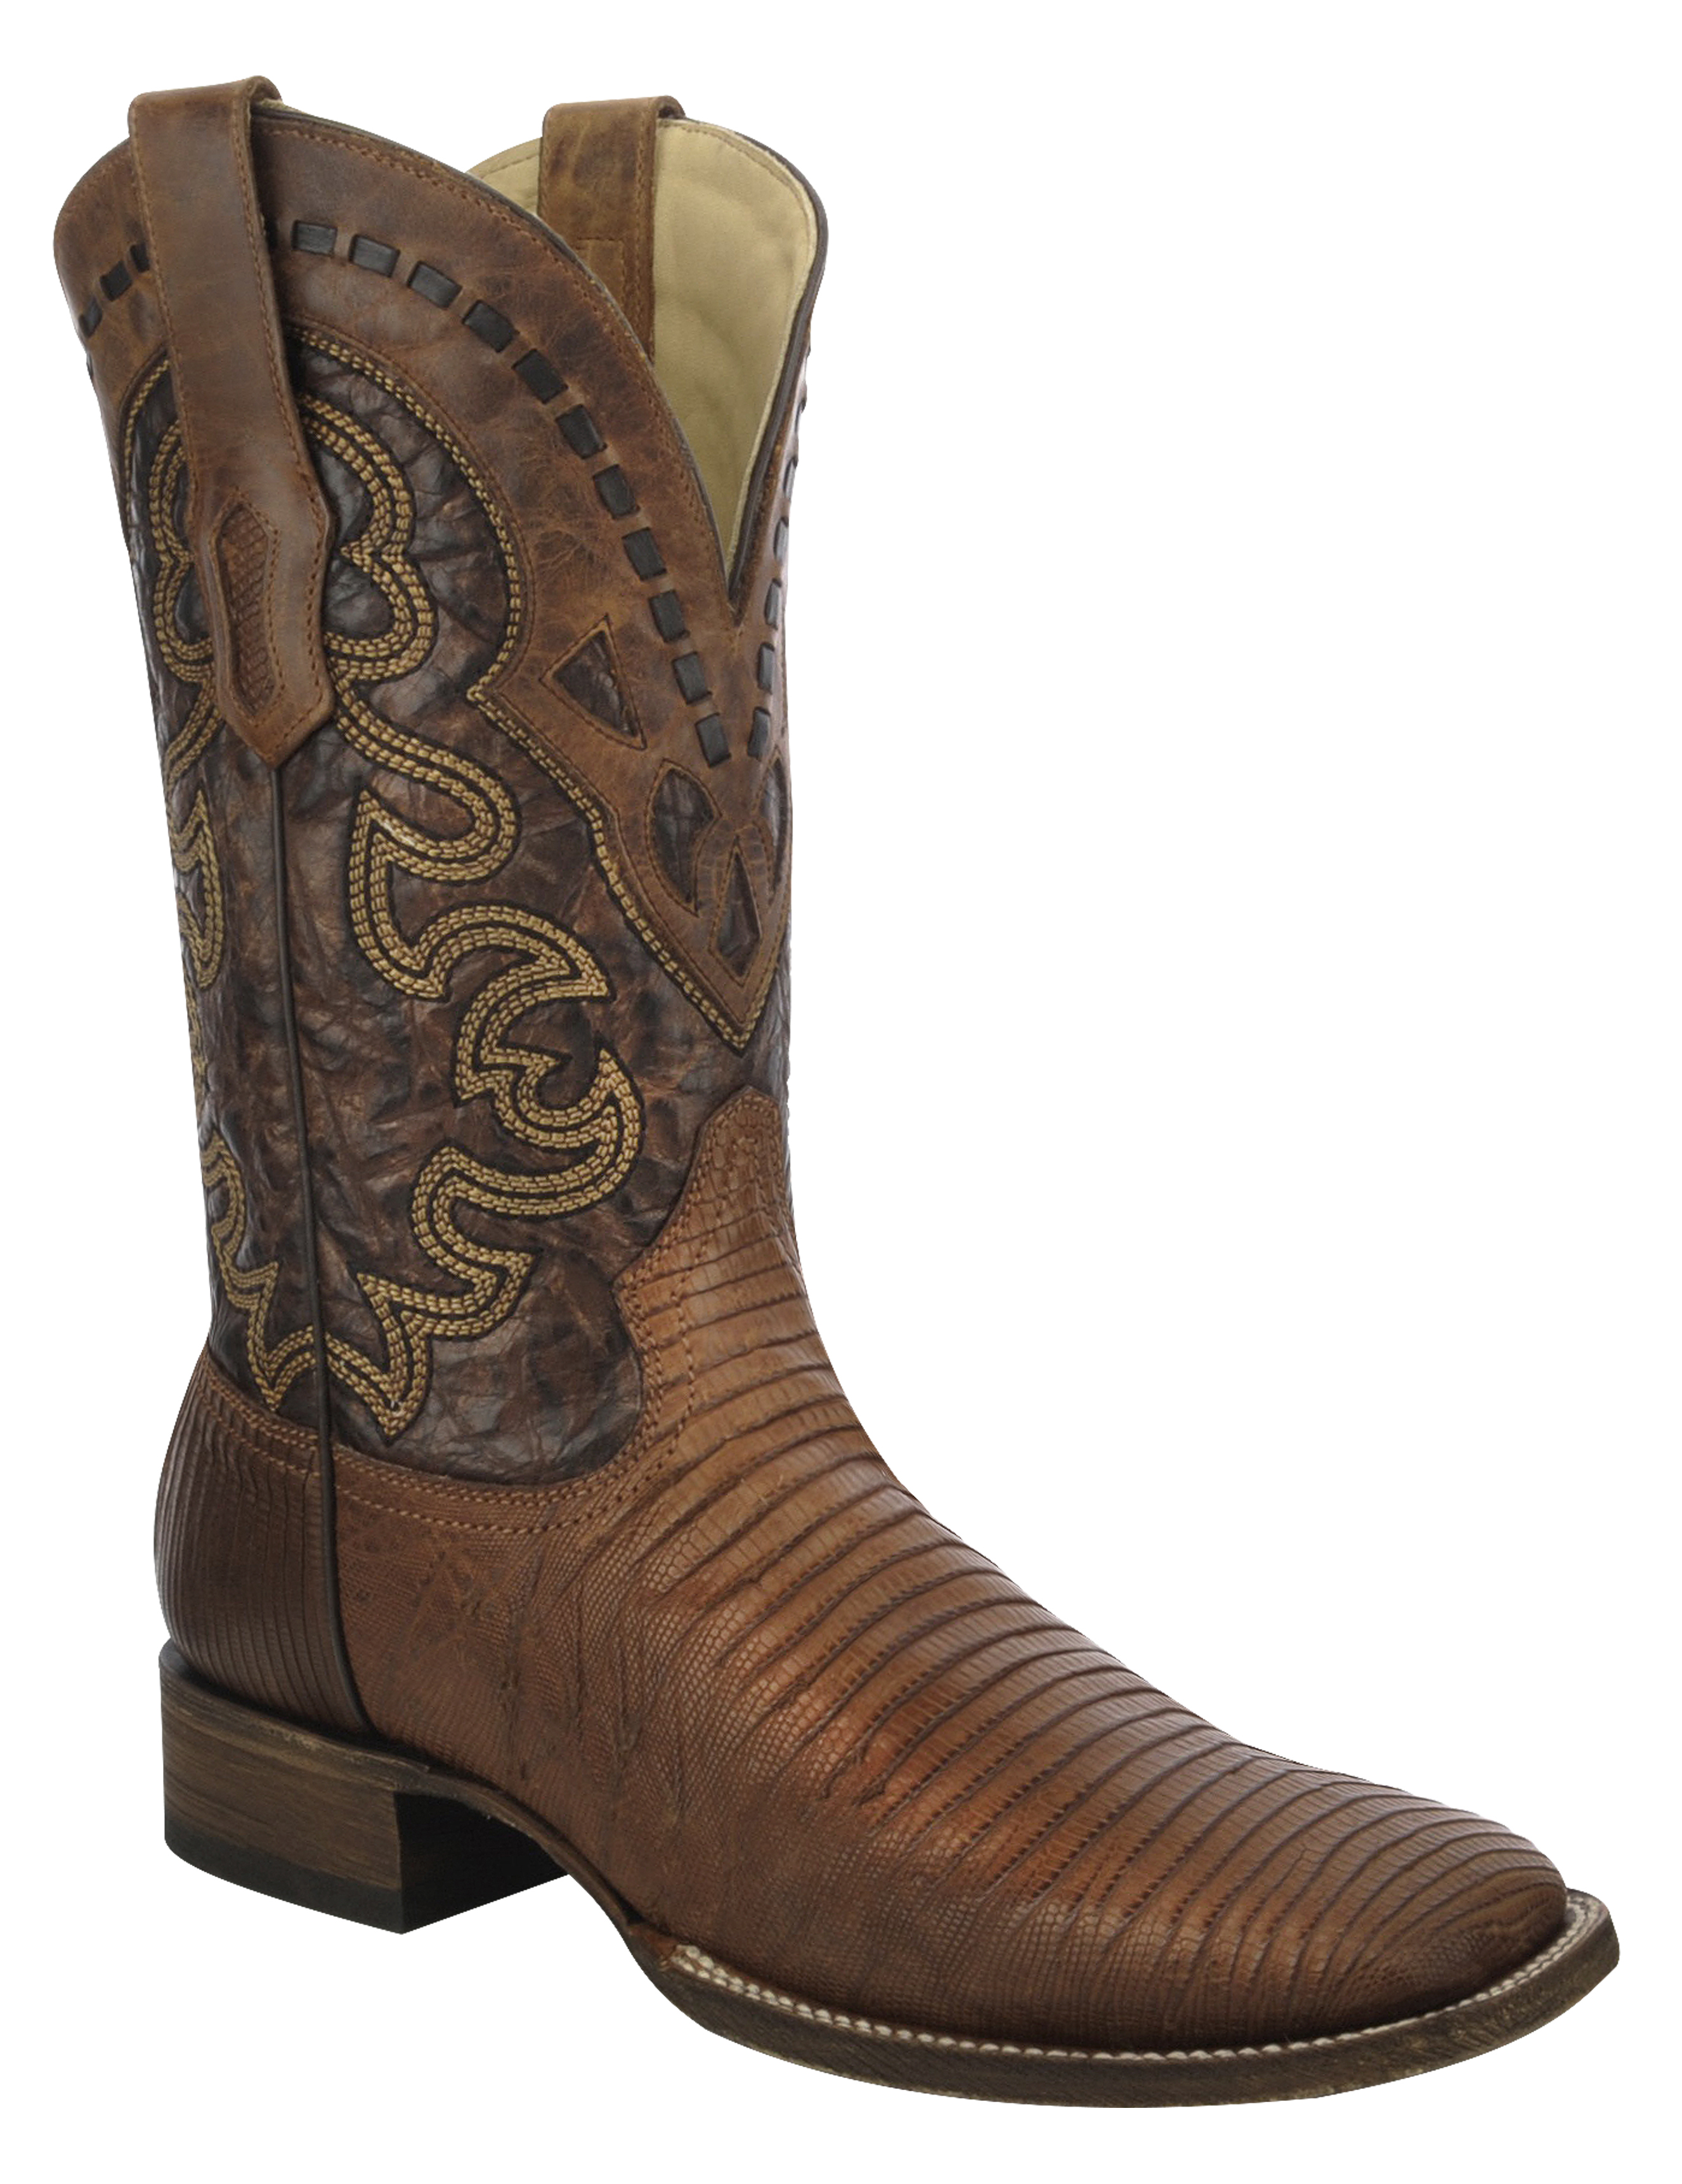 Corral Lizard Cowboy Boots - Wide Square Toe | Sheplers